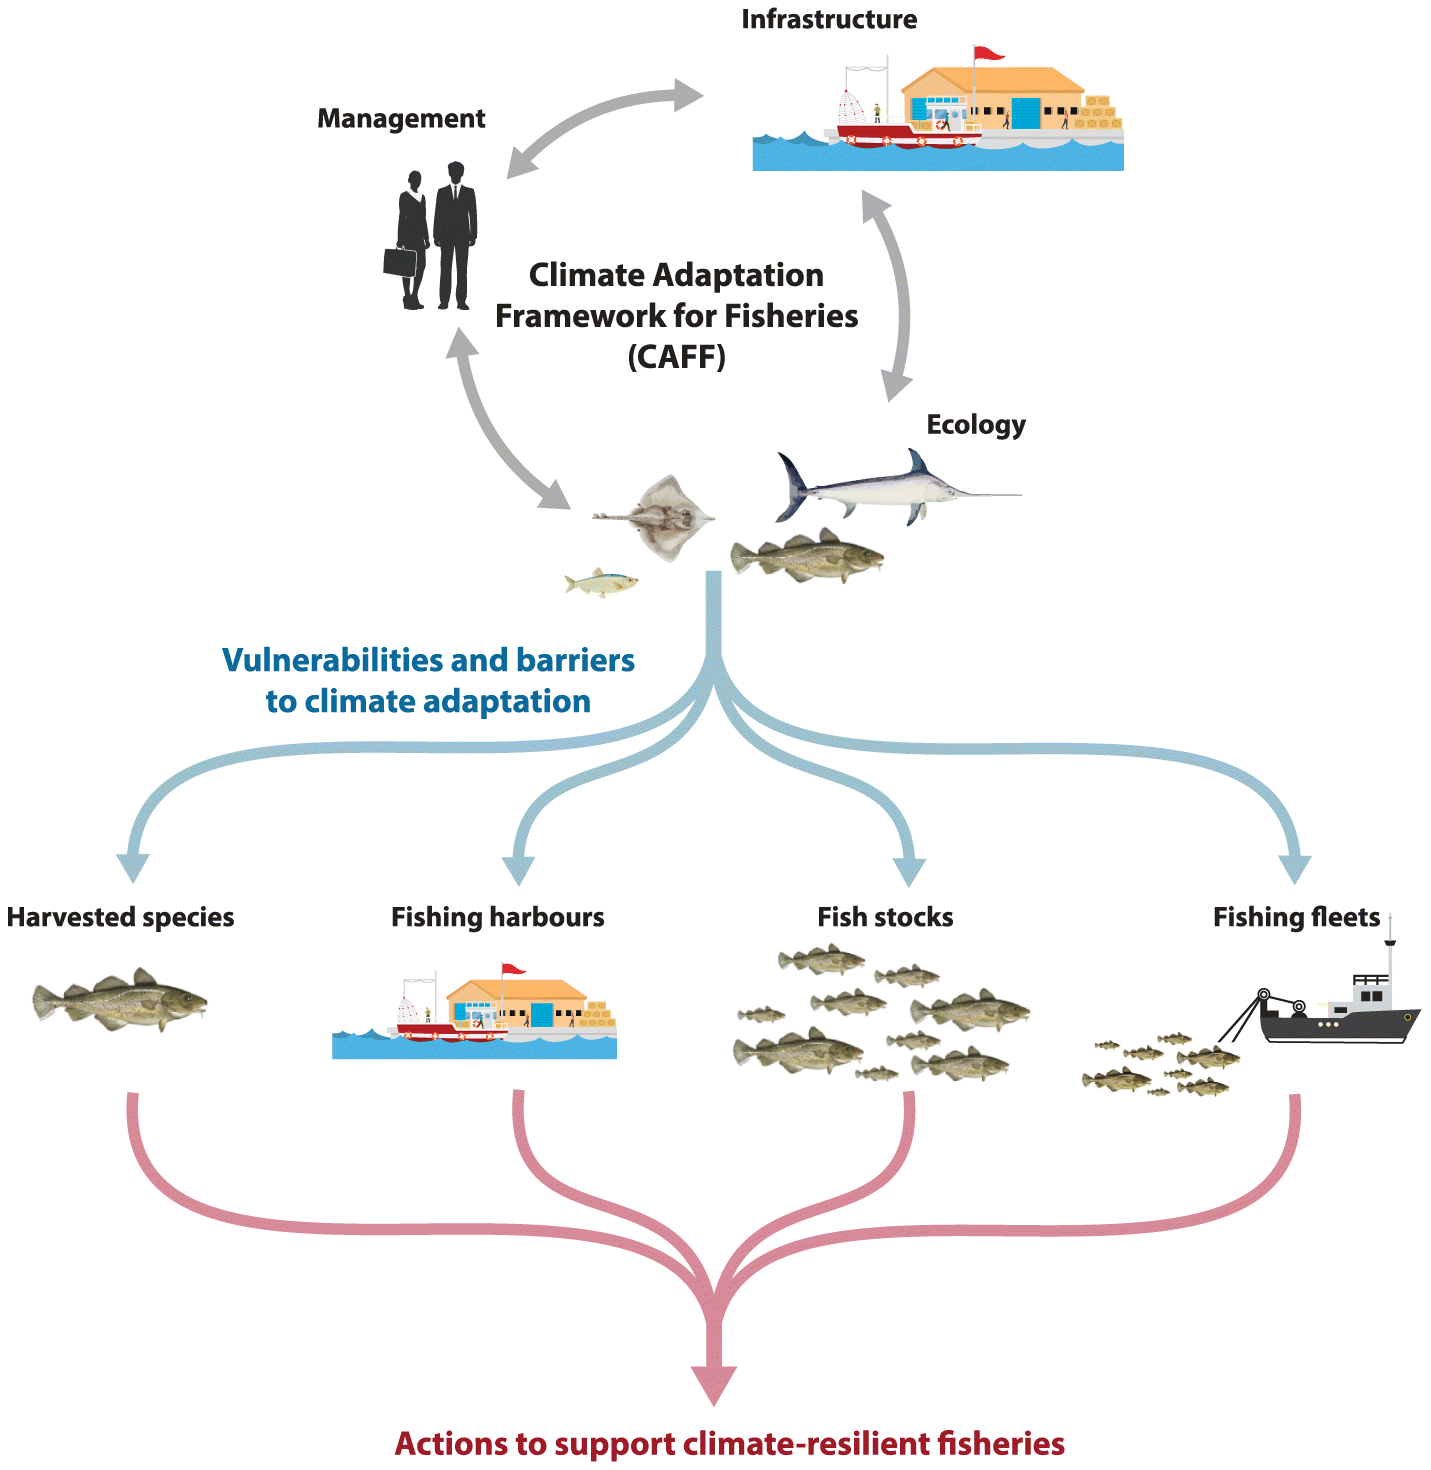 A prospective framework to support climate-adaptive fisheries in Canada